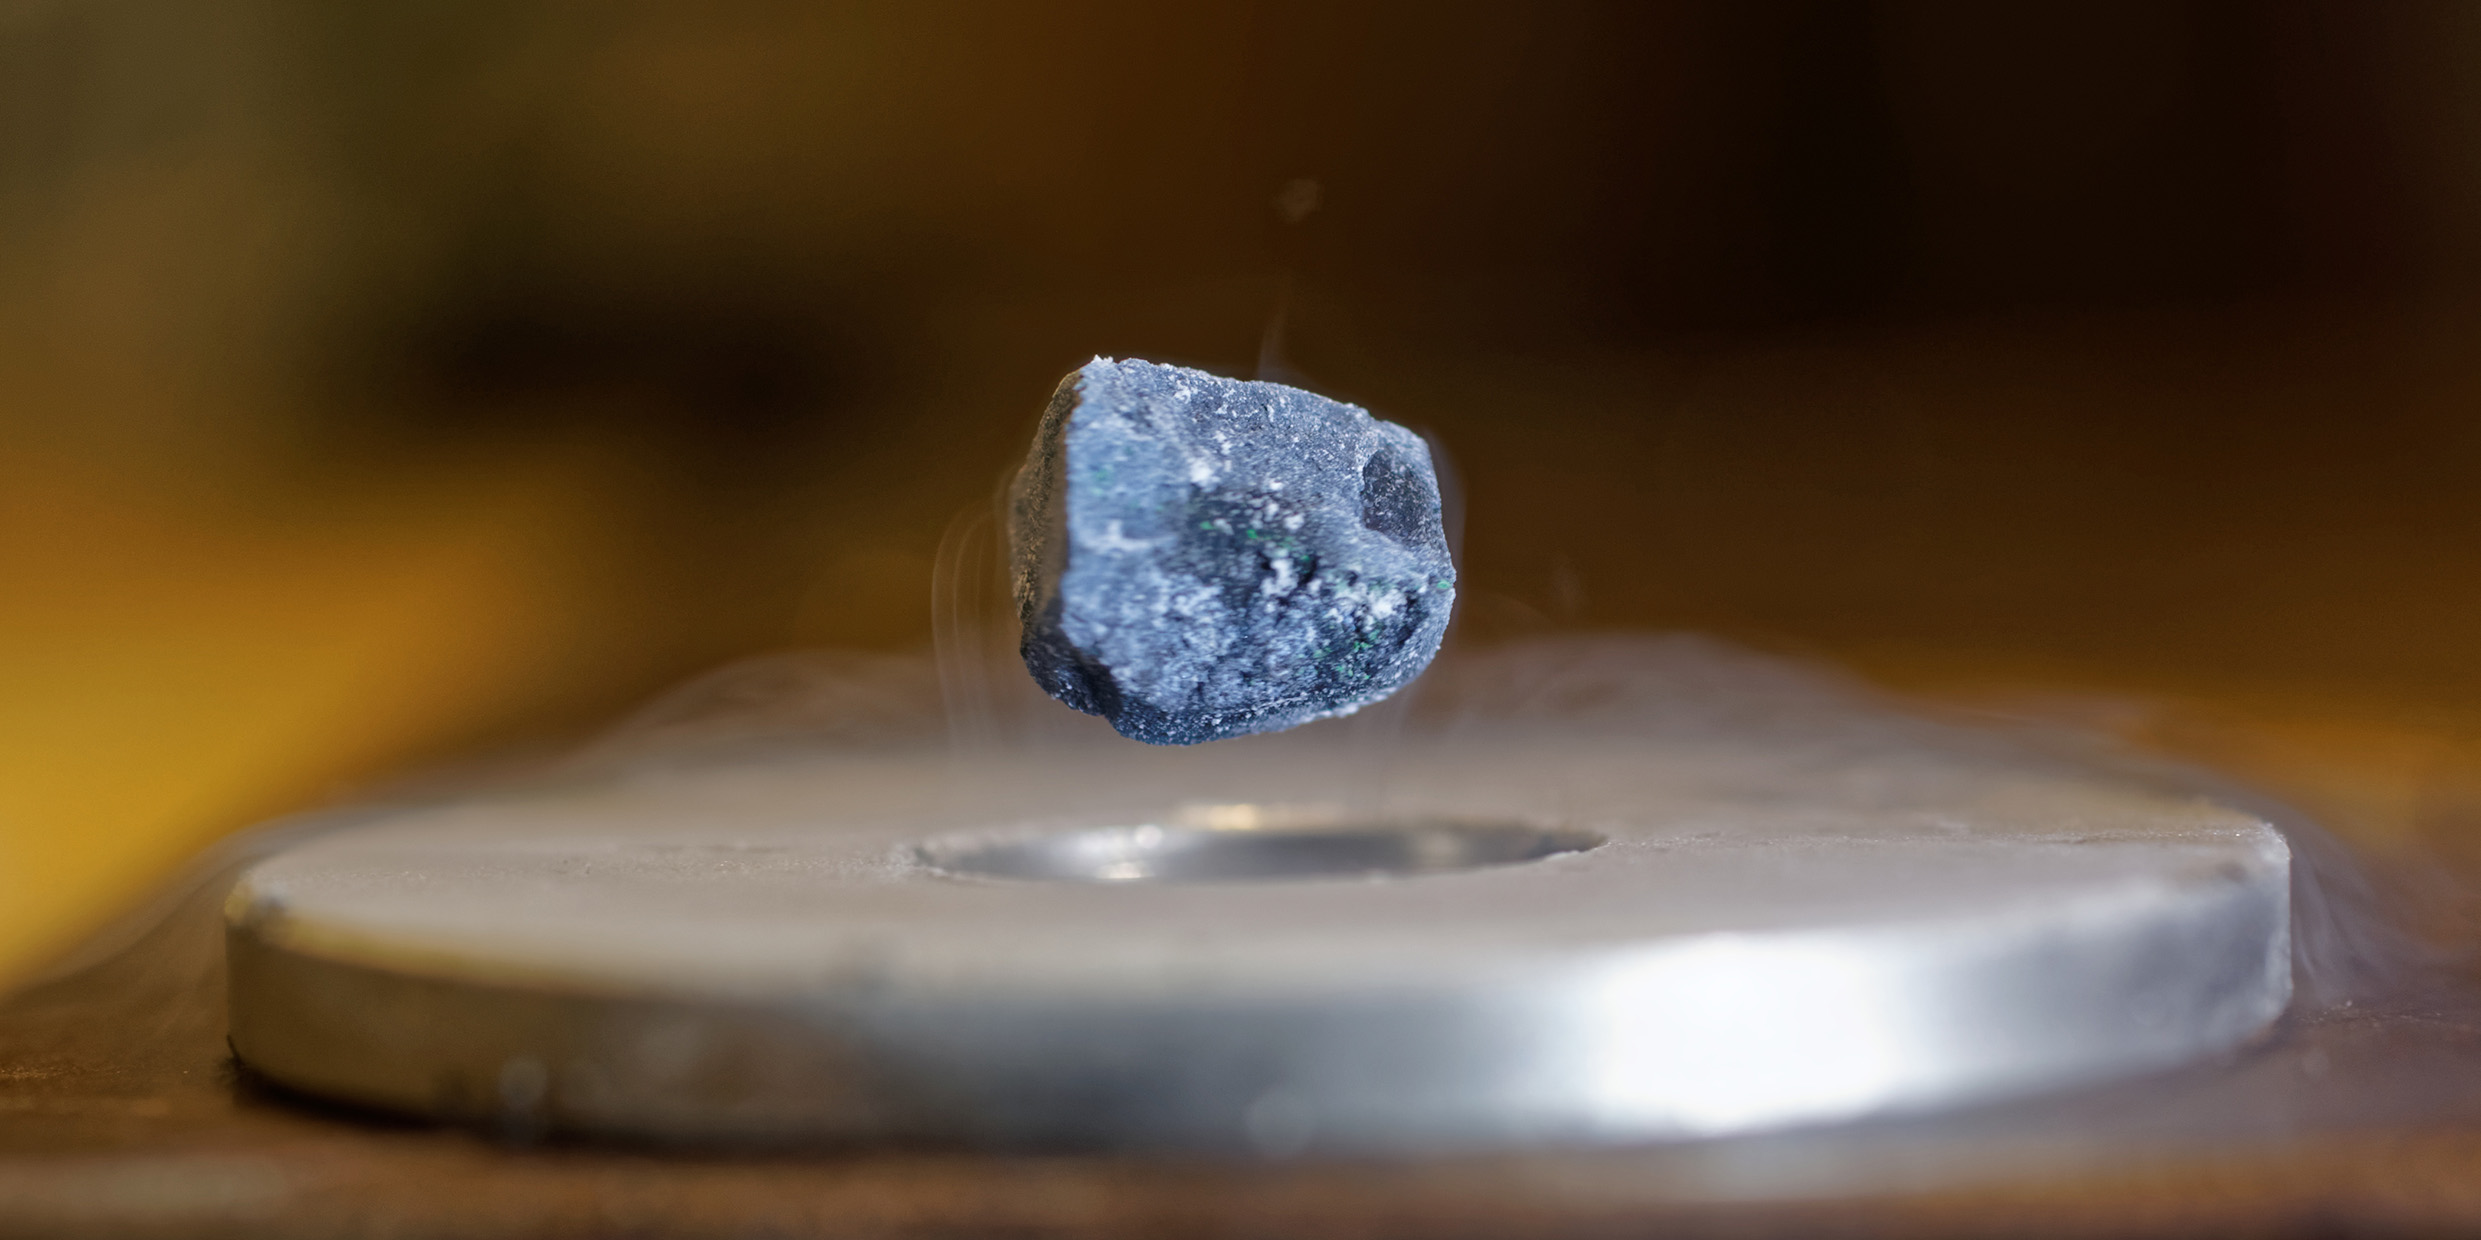 Image of a levitating superconductor